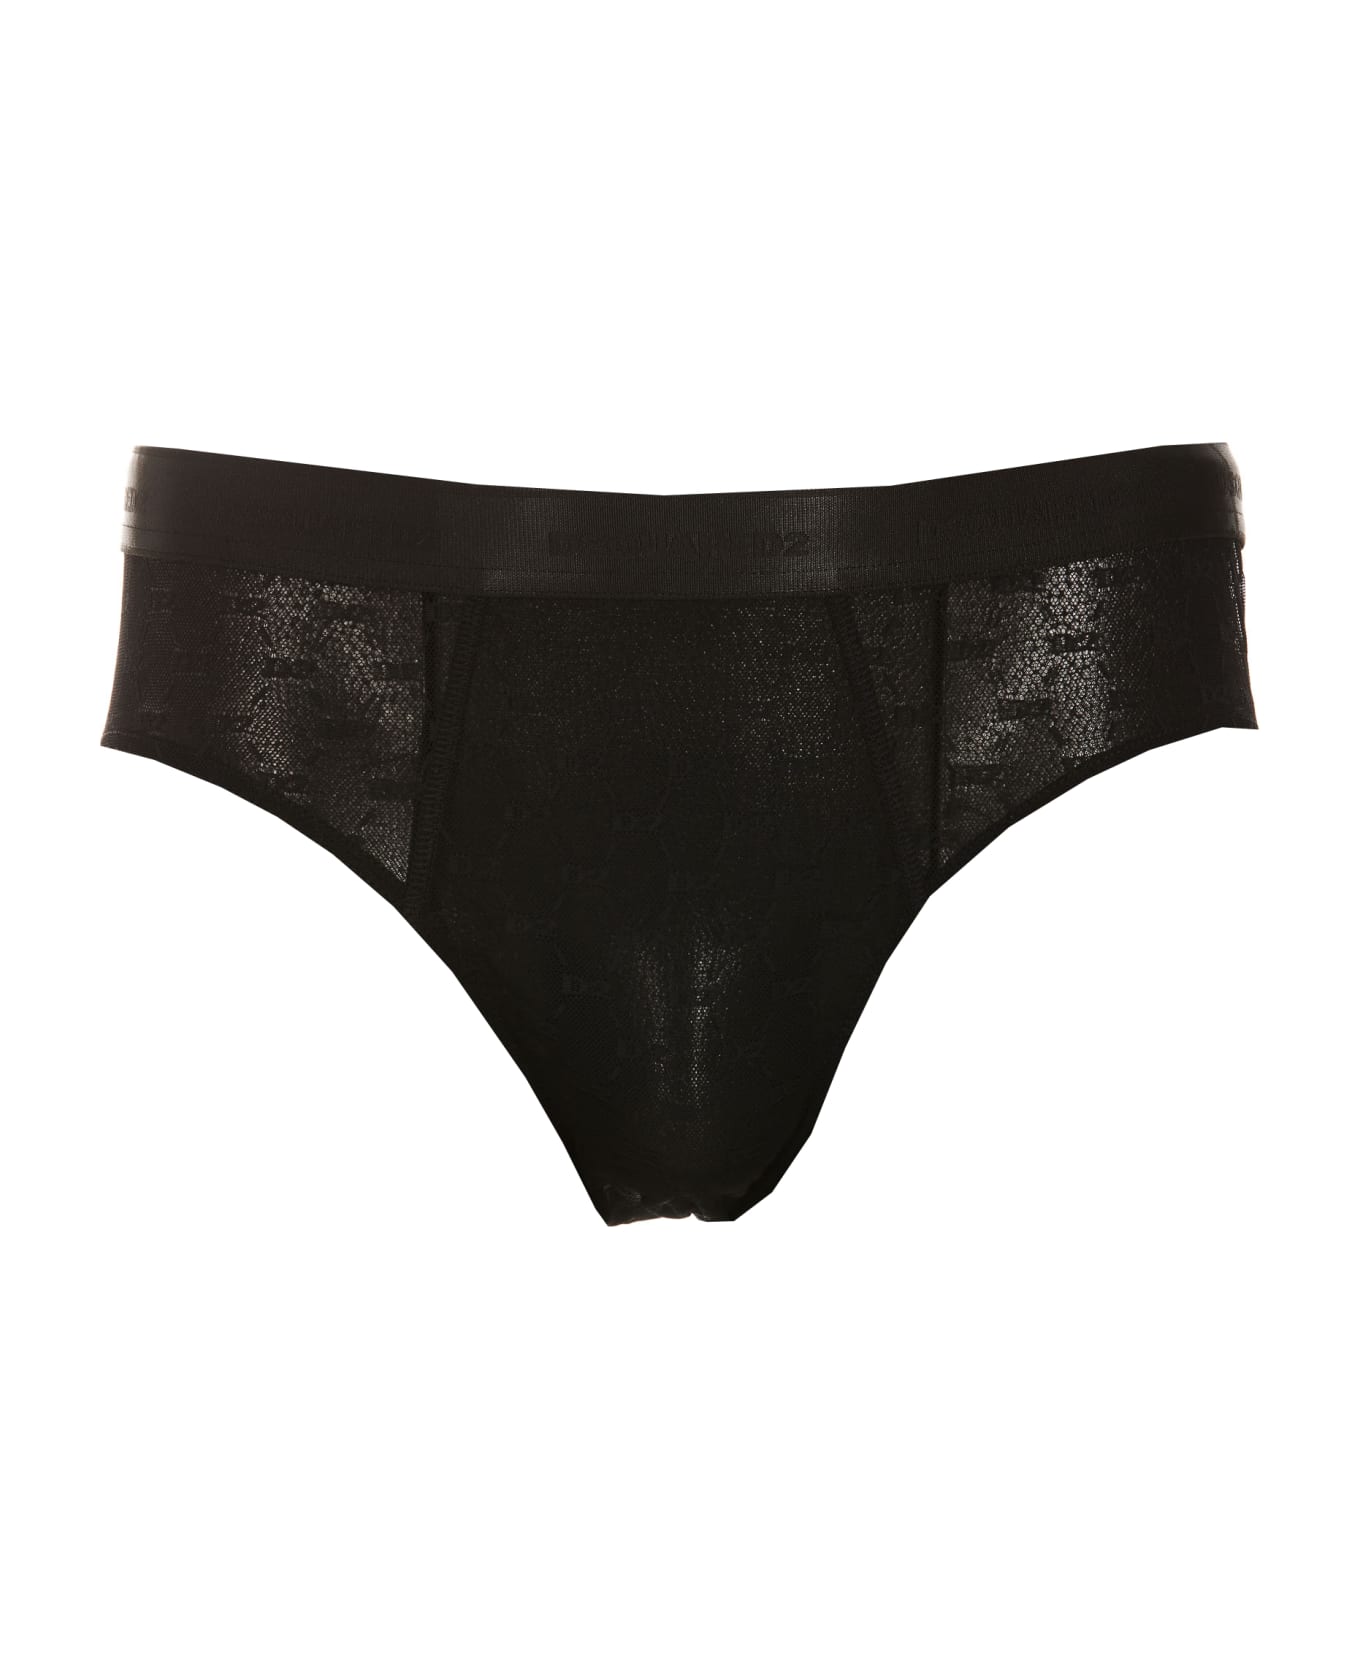 Dsquared2 The Round Up Brief - Black